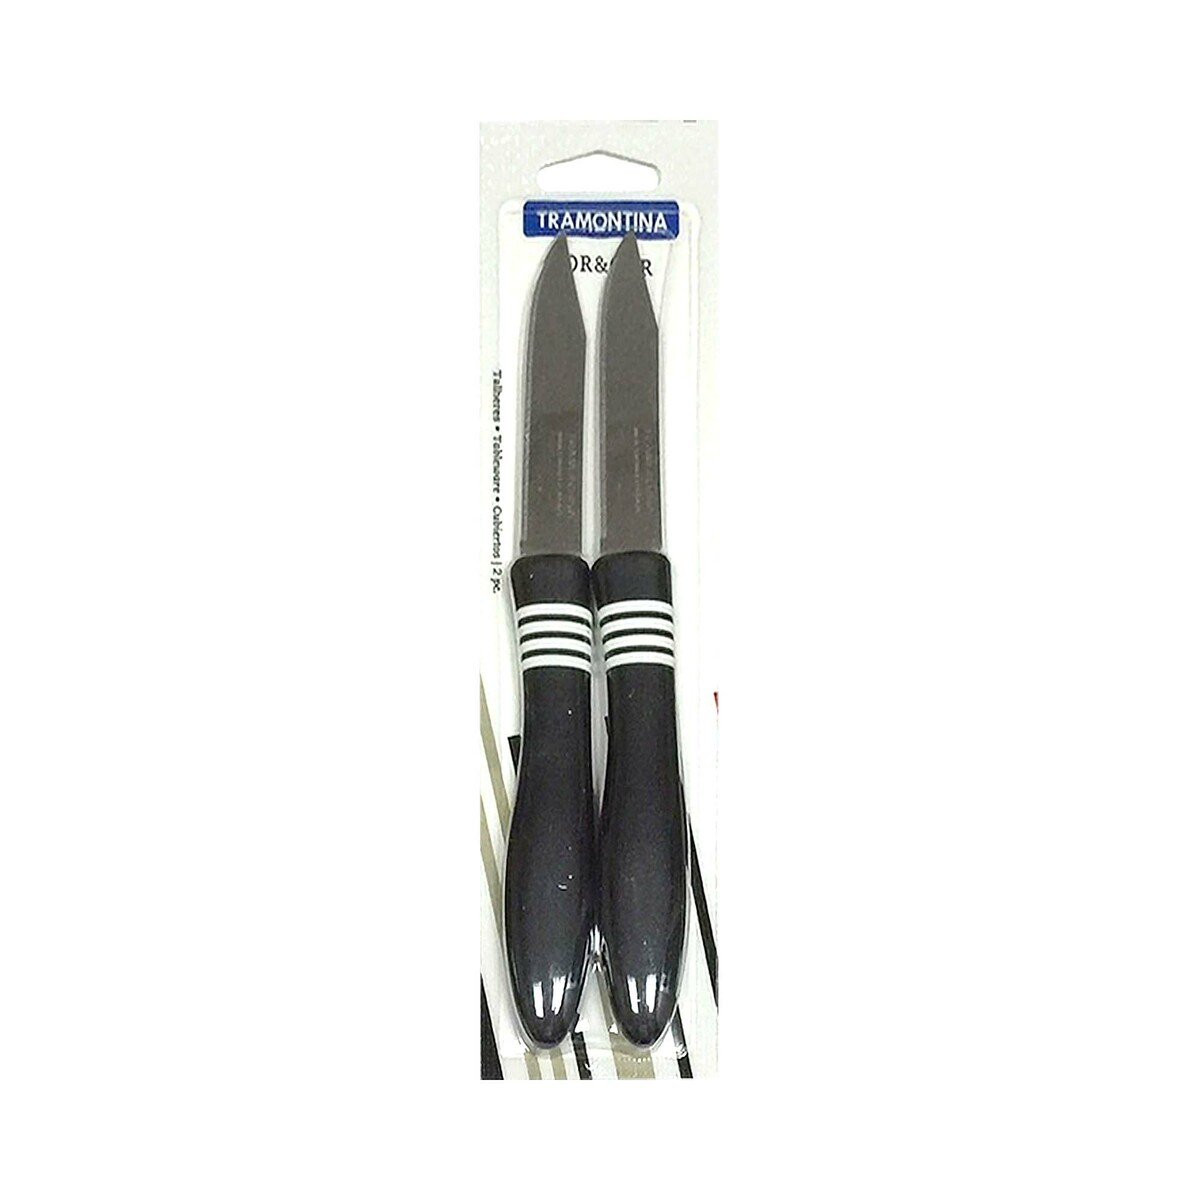 Tramontina Cor&Cor Paring Knife TR2364 5inch Assorted 2pcs